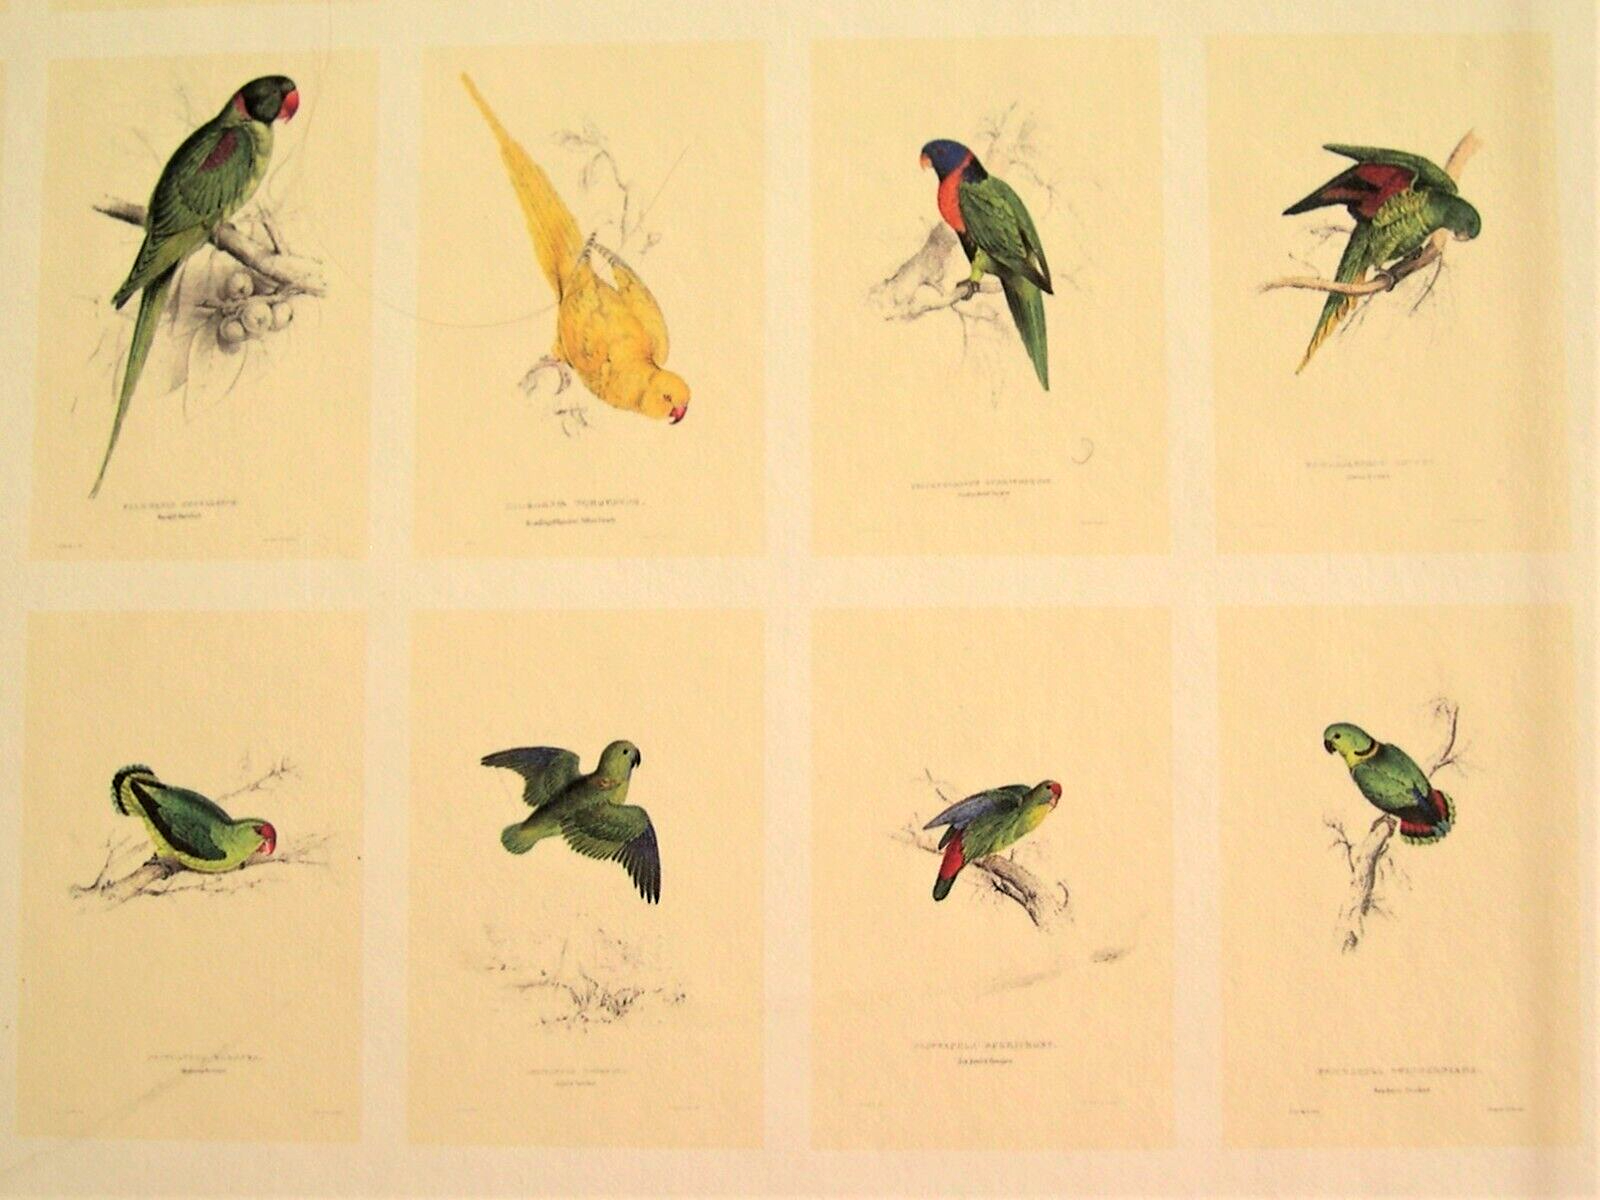 42 Lear Parrot Prints; The Complete Set Directly From His Original 1832 Folio Без бренда - фотография #8